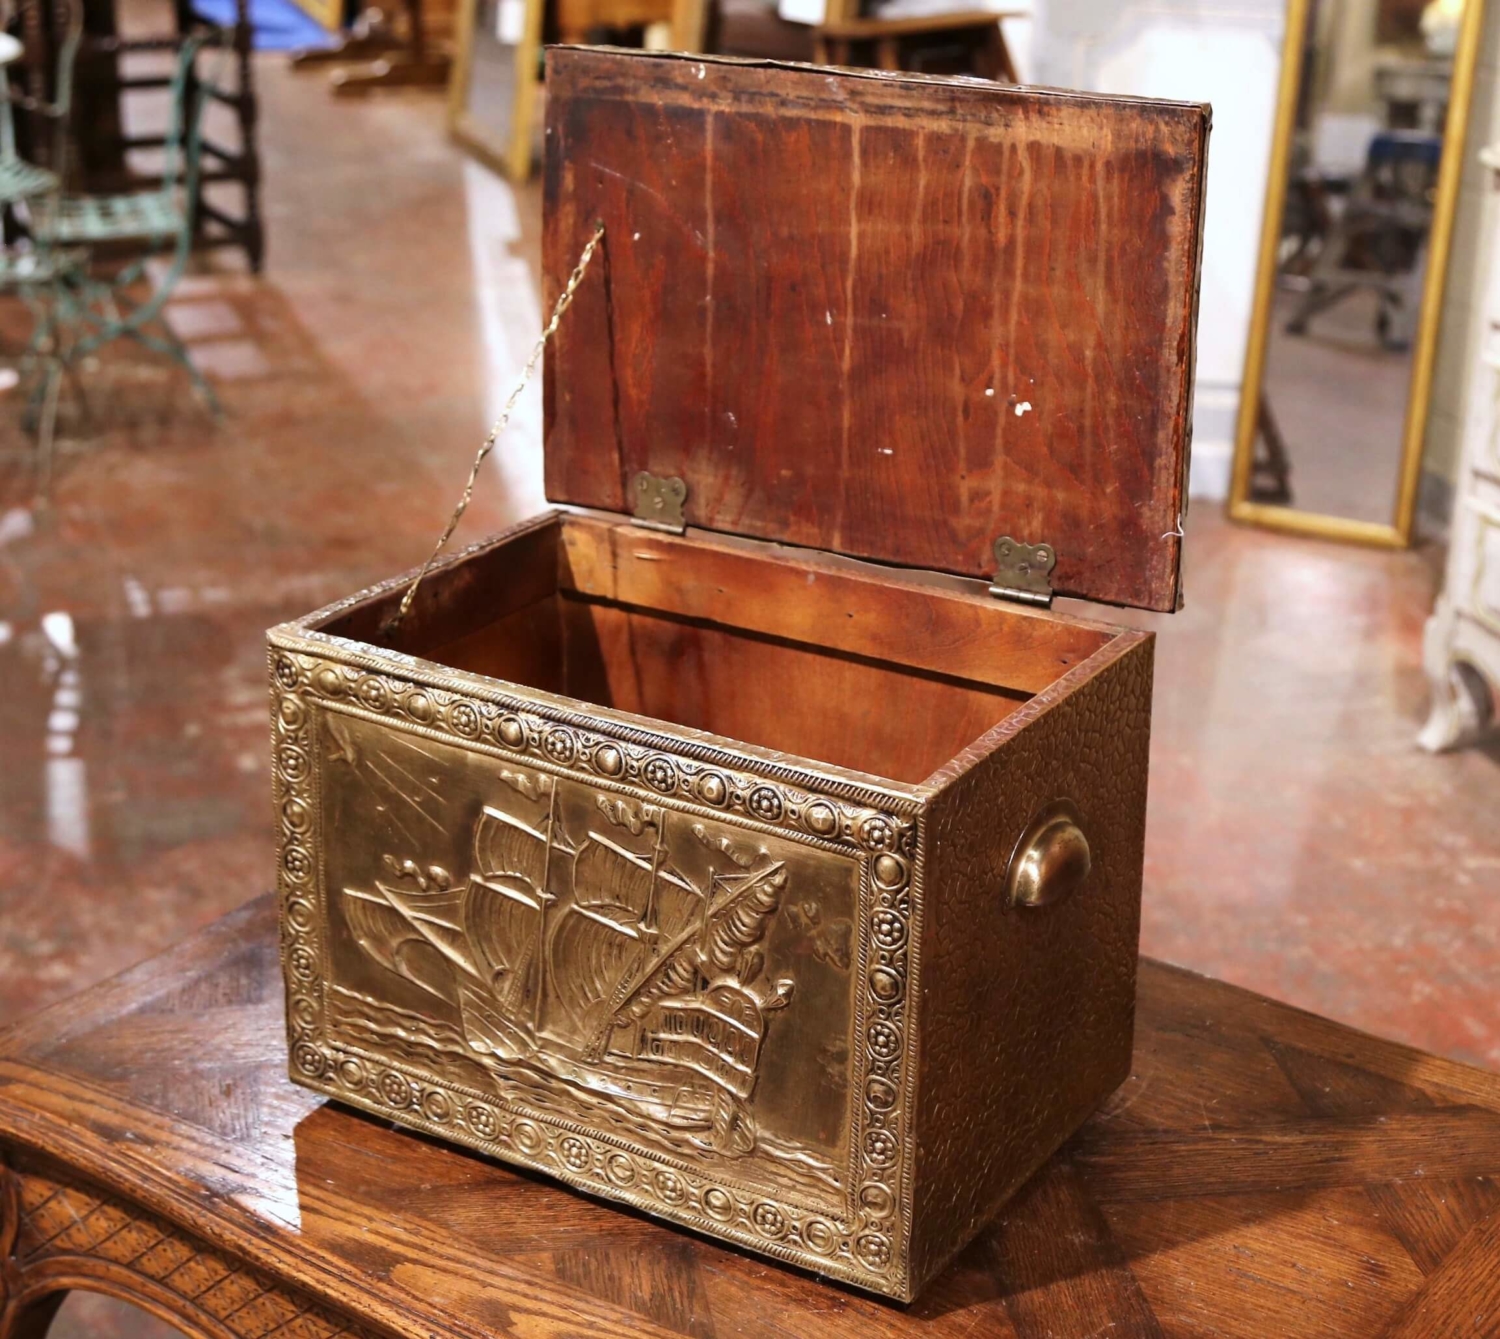 19th Century French Repousse Brass and Wood Box with Sailboat Decor -  Country French Interiors